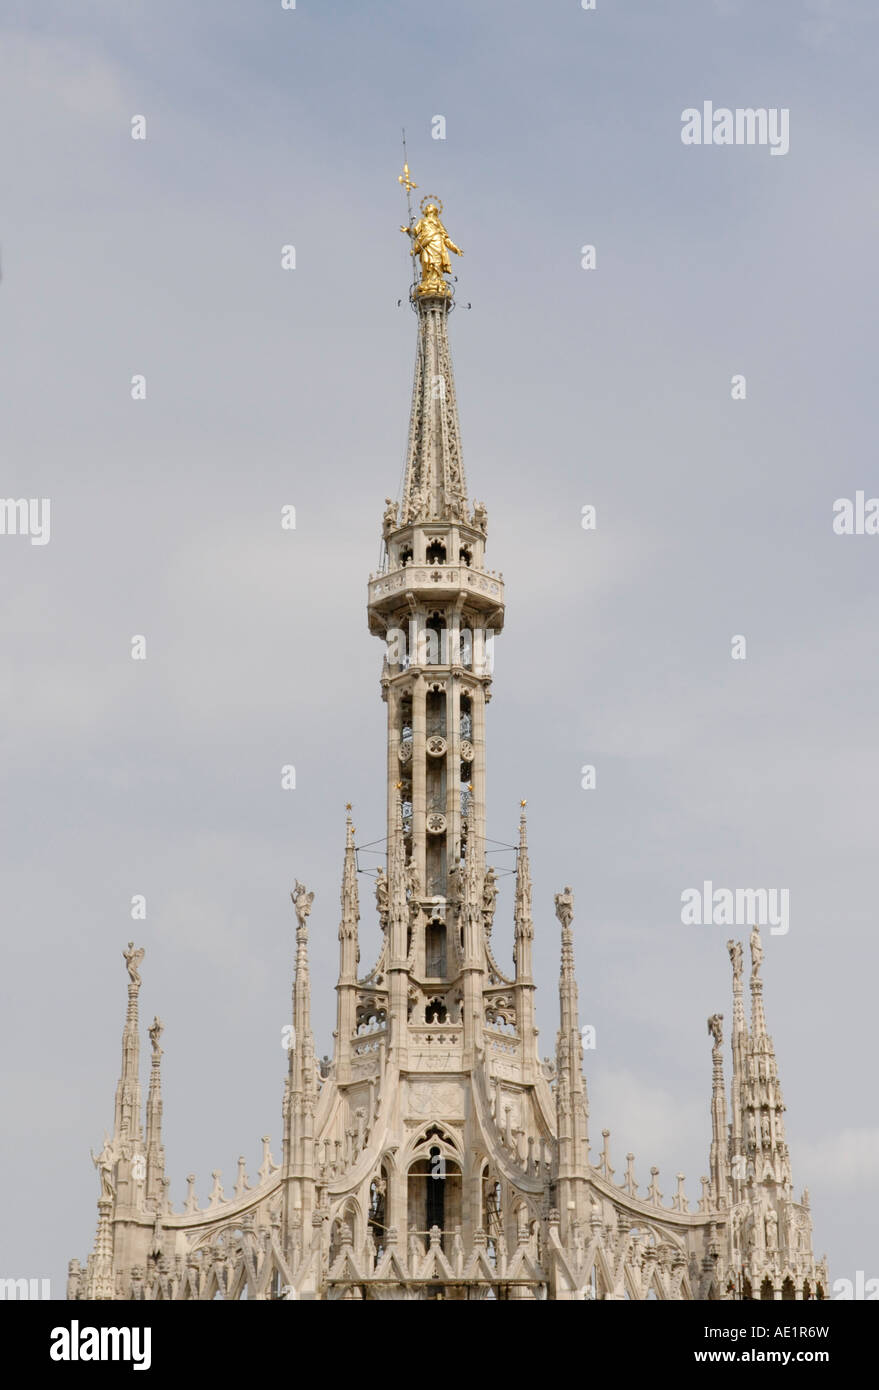 Spire of Duomo di Milano, the Milan Cathedral, from the roof, with the golden Madonna statue, La Madunina Stock Photo